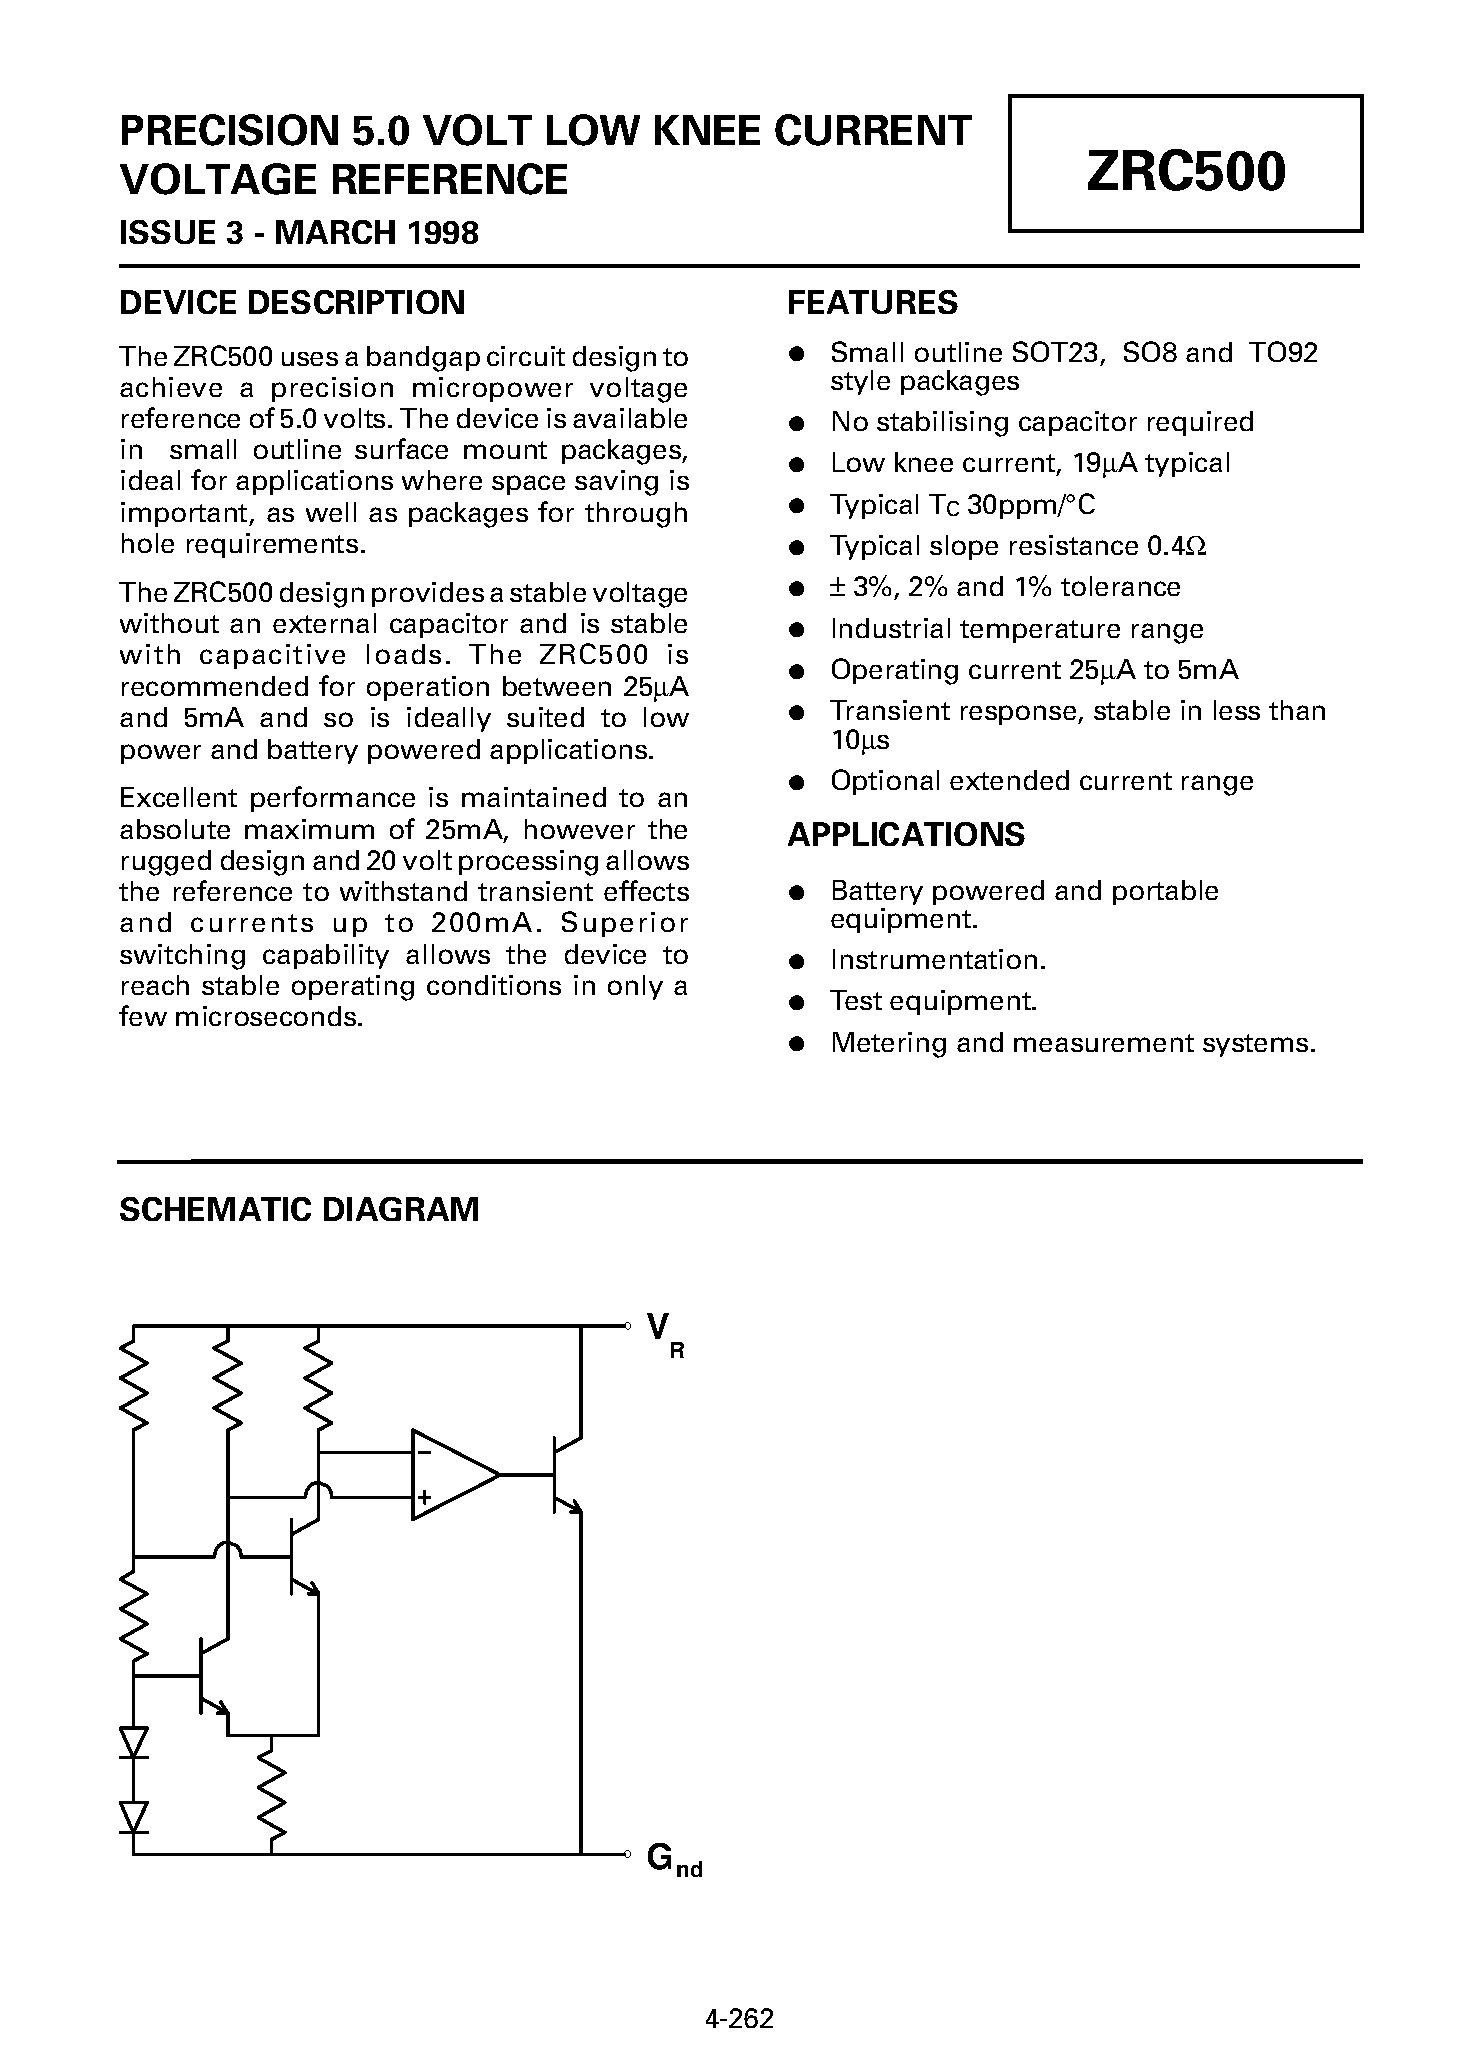 Datasheet ZRC500R01 - PRECISION 5.0 VOLT LOW KNEE CURRENT VOLTAGE REFERENCE page 1